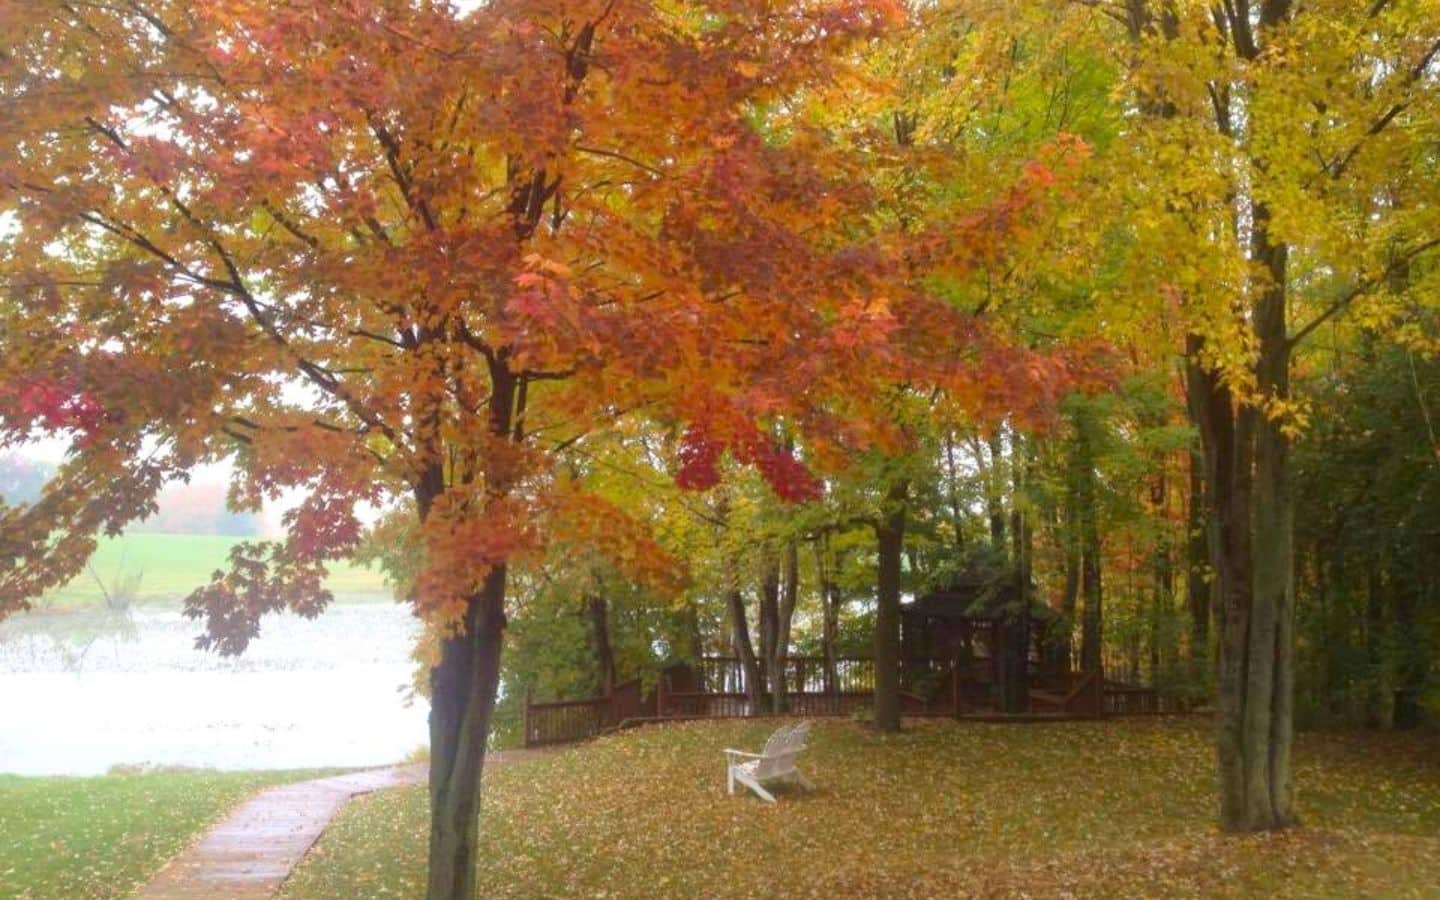 A view of the pond and gazebo surrounded by trees brilliant with fall foliage